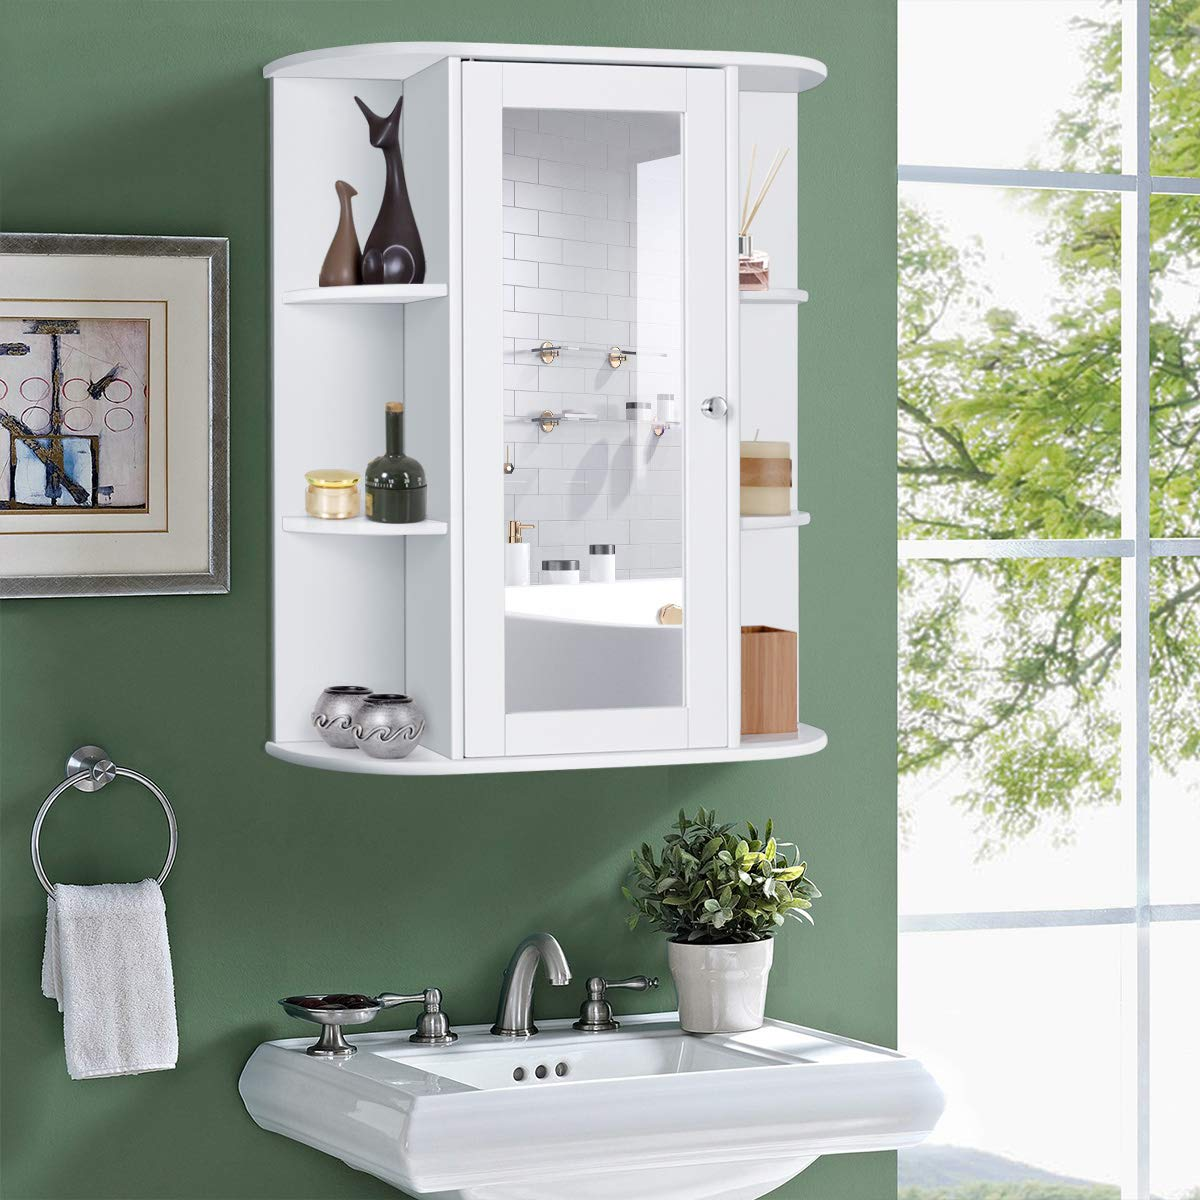 Recommended 4 Basic Bathroom Suppliers